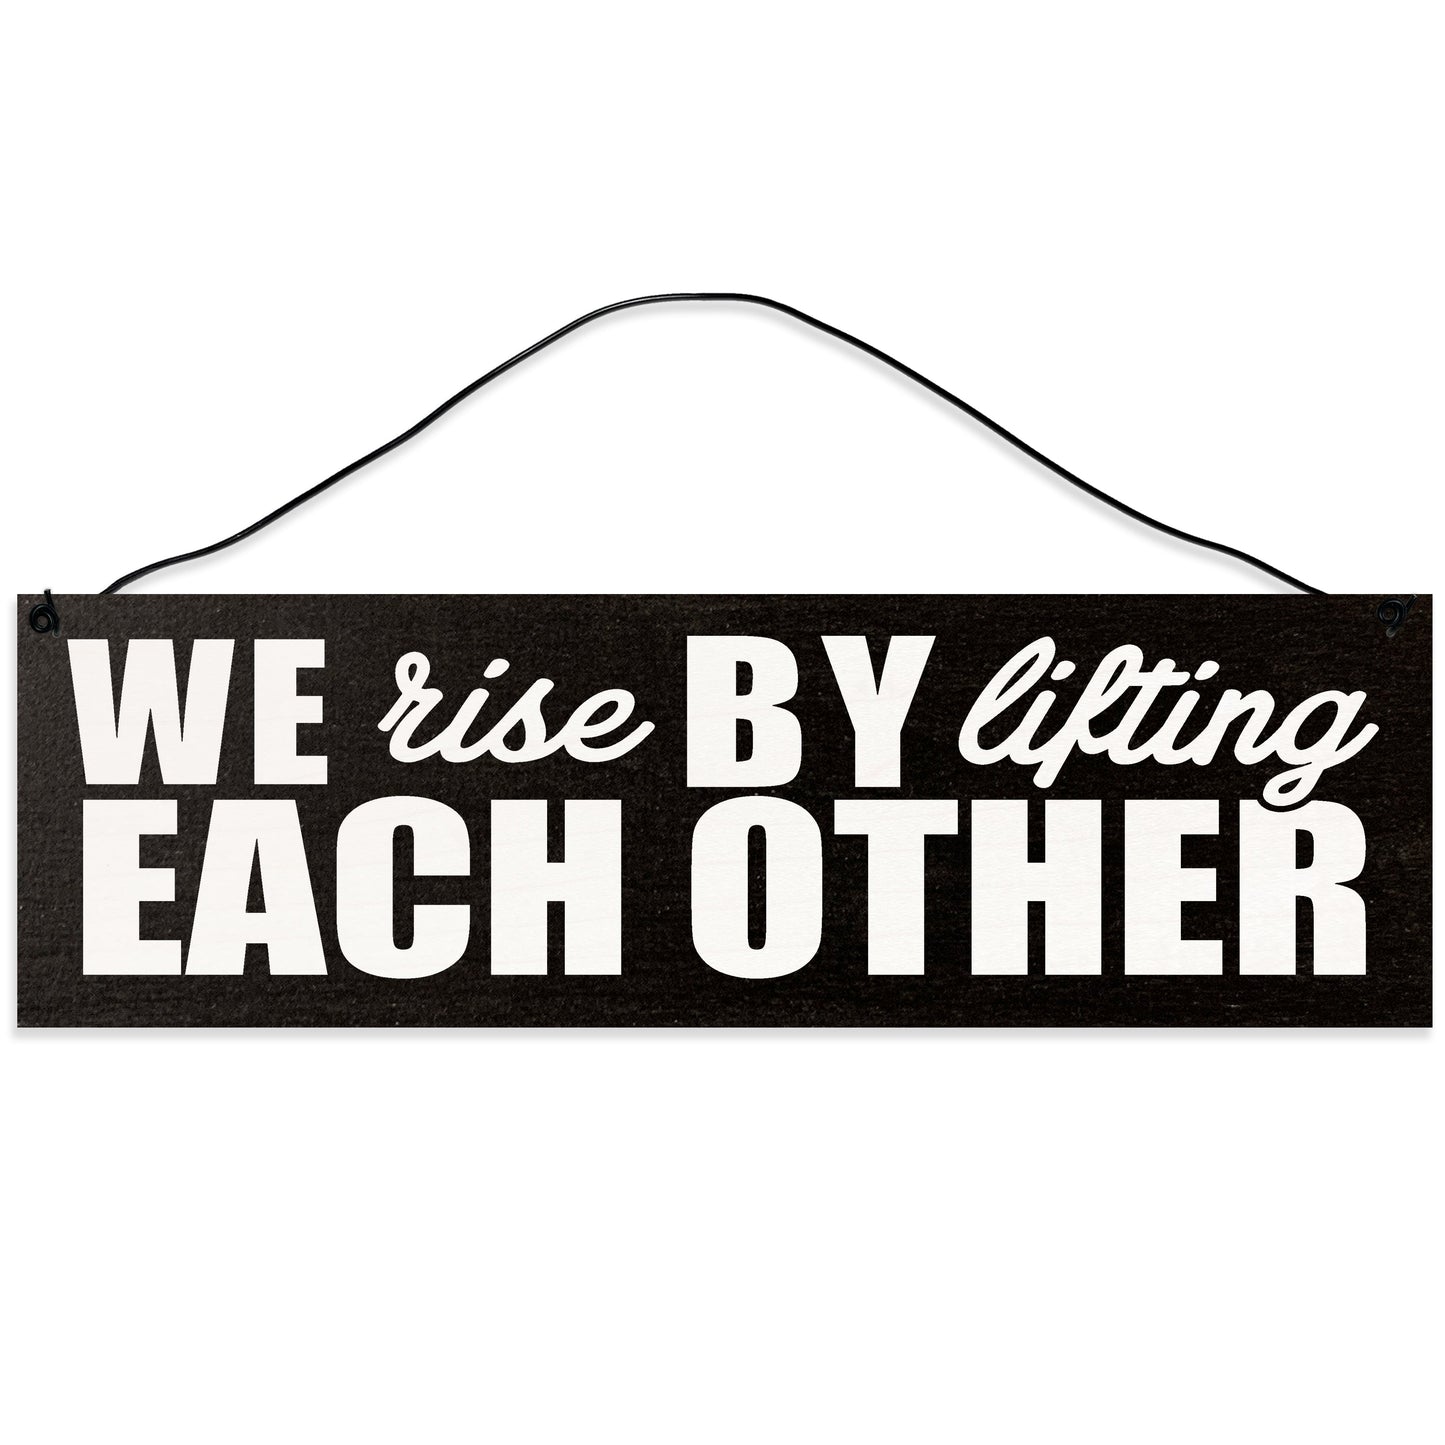 Sawyer's Mill - We Rise by Lifting Each Other. Wood Sign for Home or Office. Measures 3x10 inches.